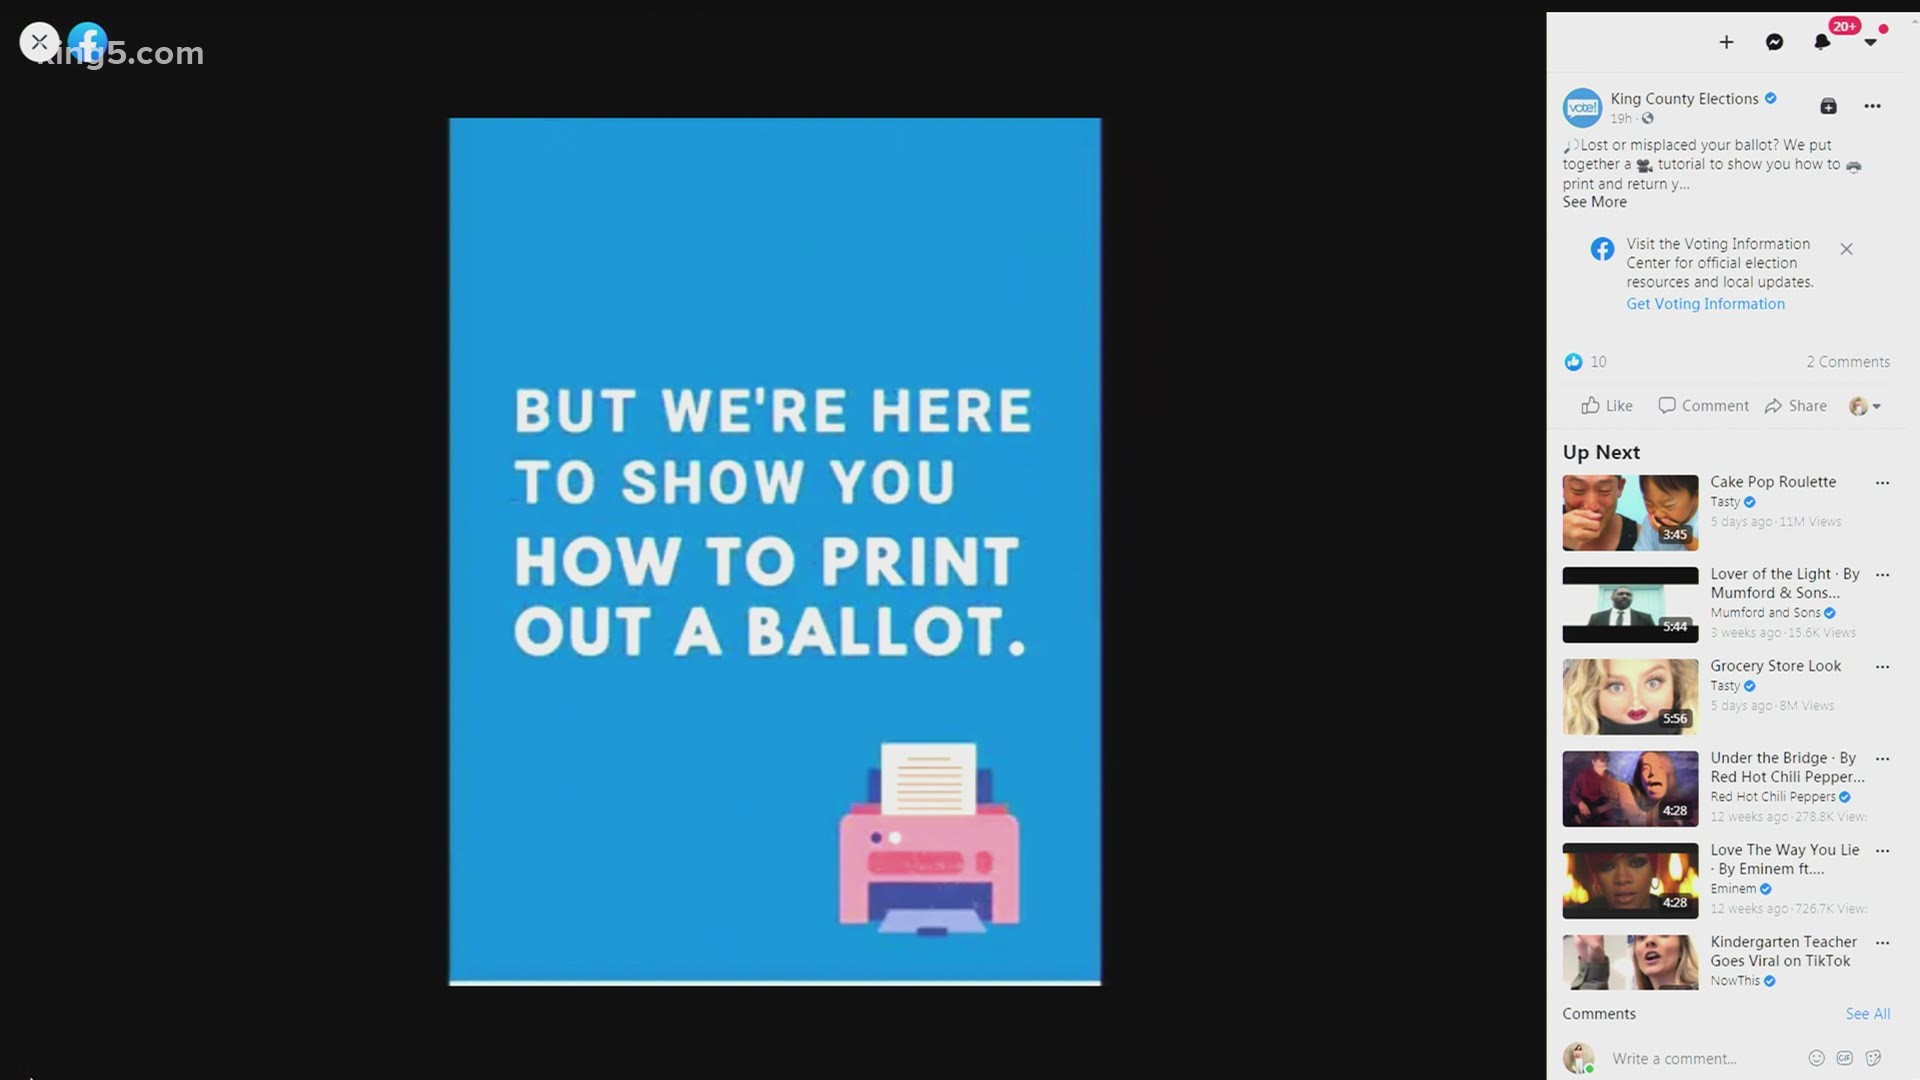 There's no excuse not to vote if you lost or damaged your ballot. Visit MyVote.wa.gov to print a replacement.